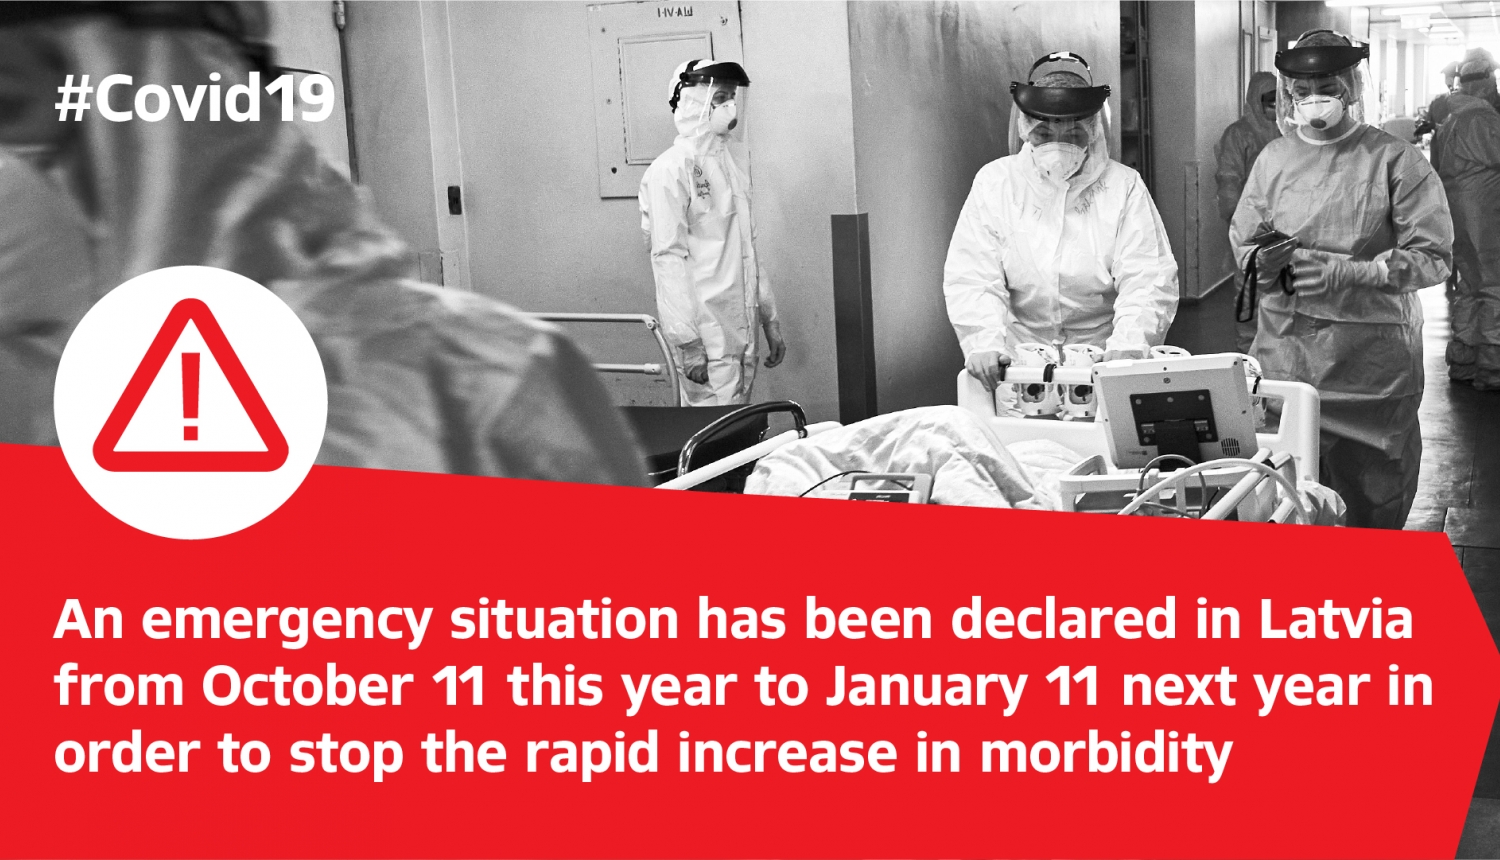 An emergency situation has been declared in Latvia from October 11 this year to January 11 next year in order to stop the rapid increase in morbidity